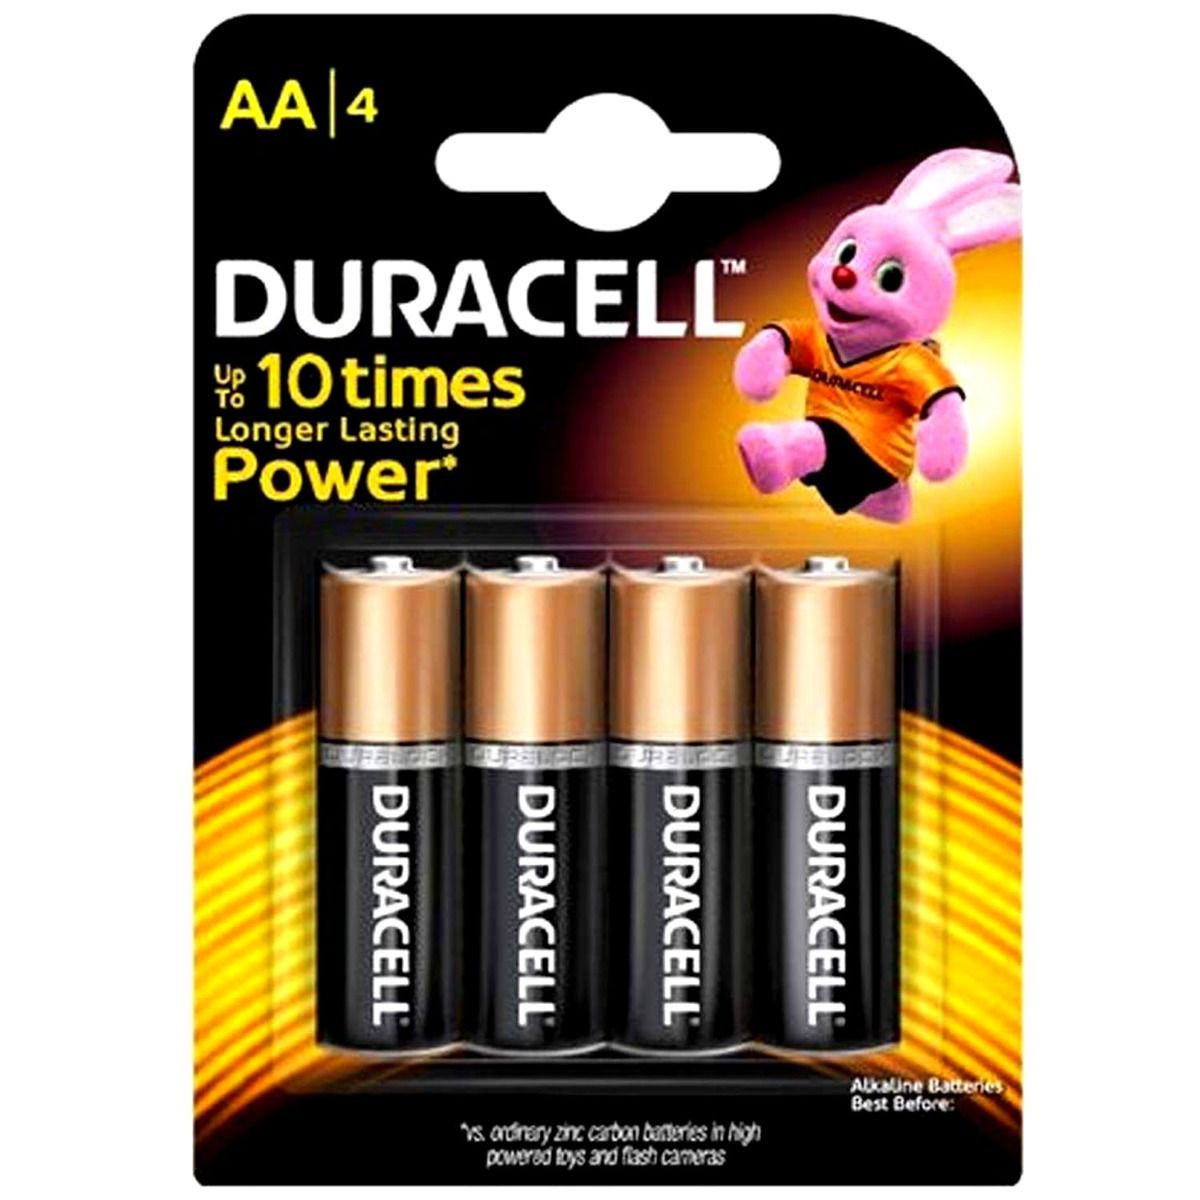 Duracell AA Batteries, 4 Count, Pack of 1 